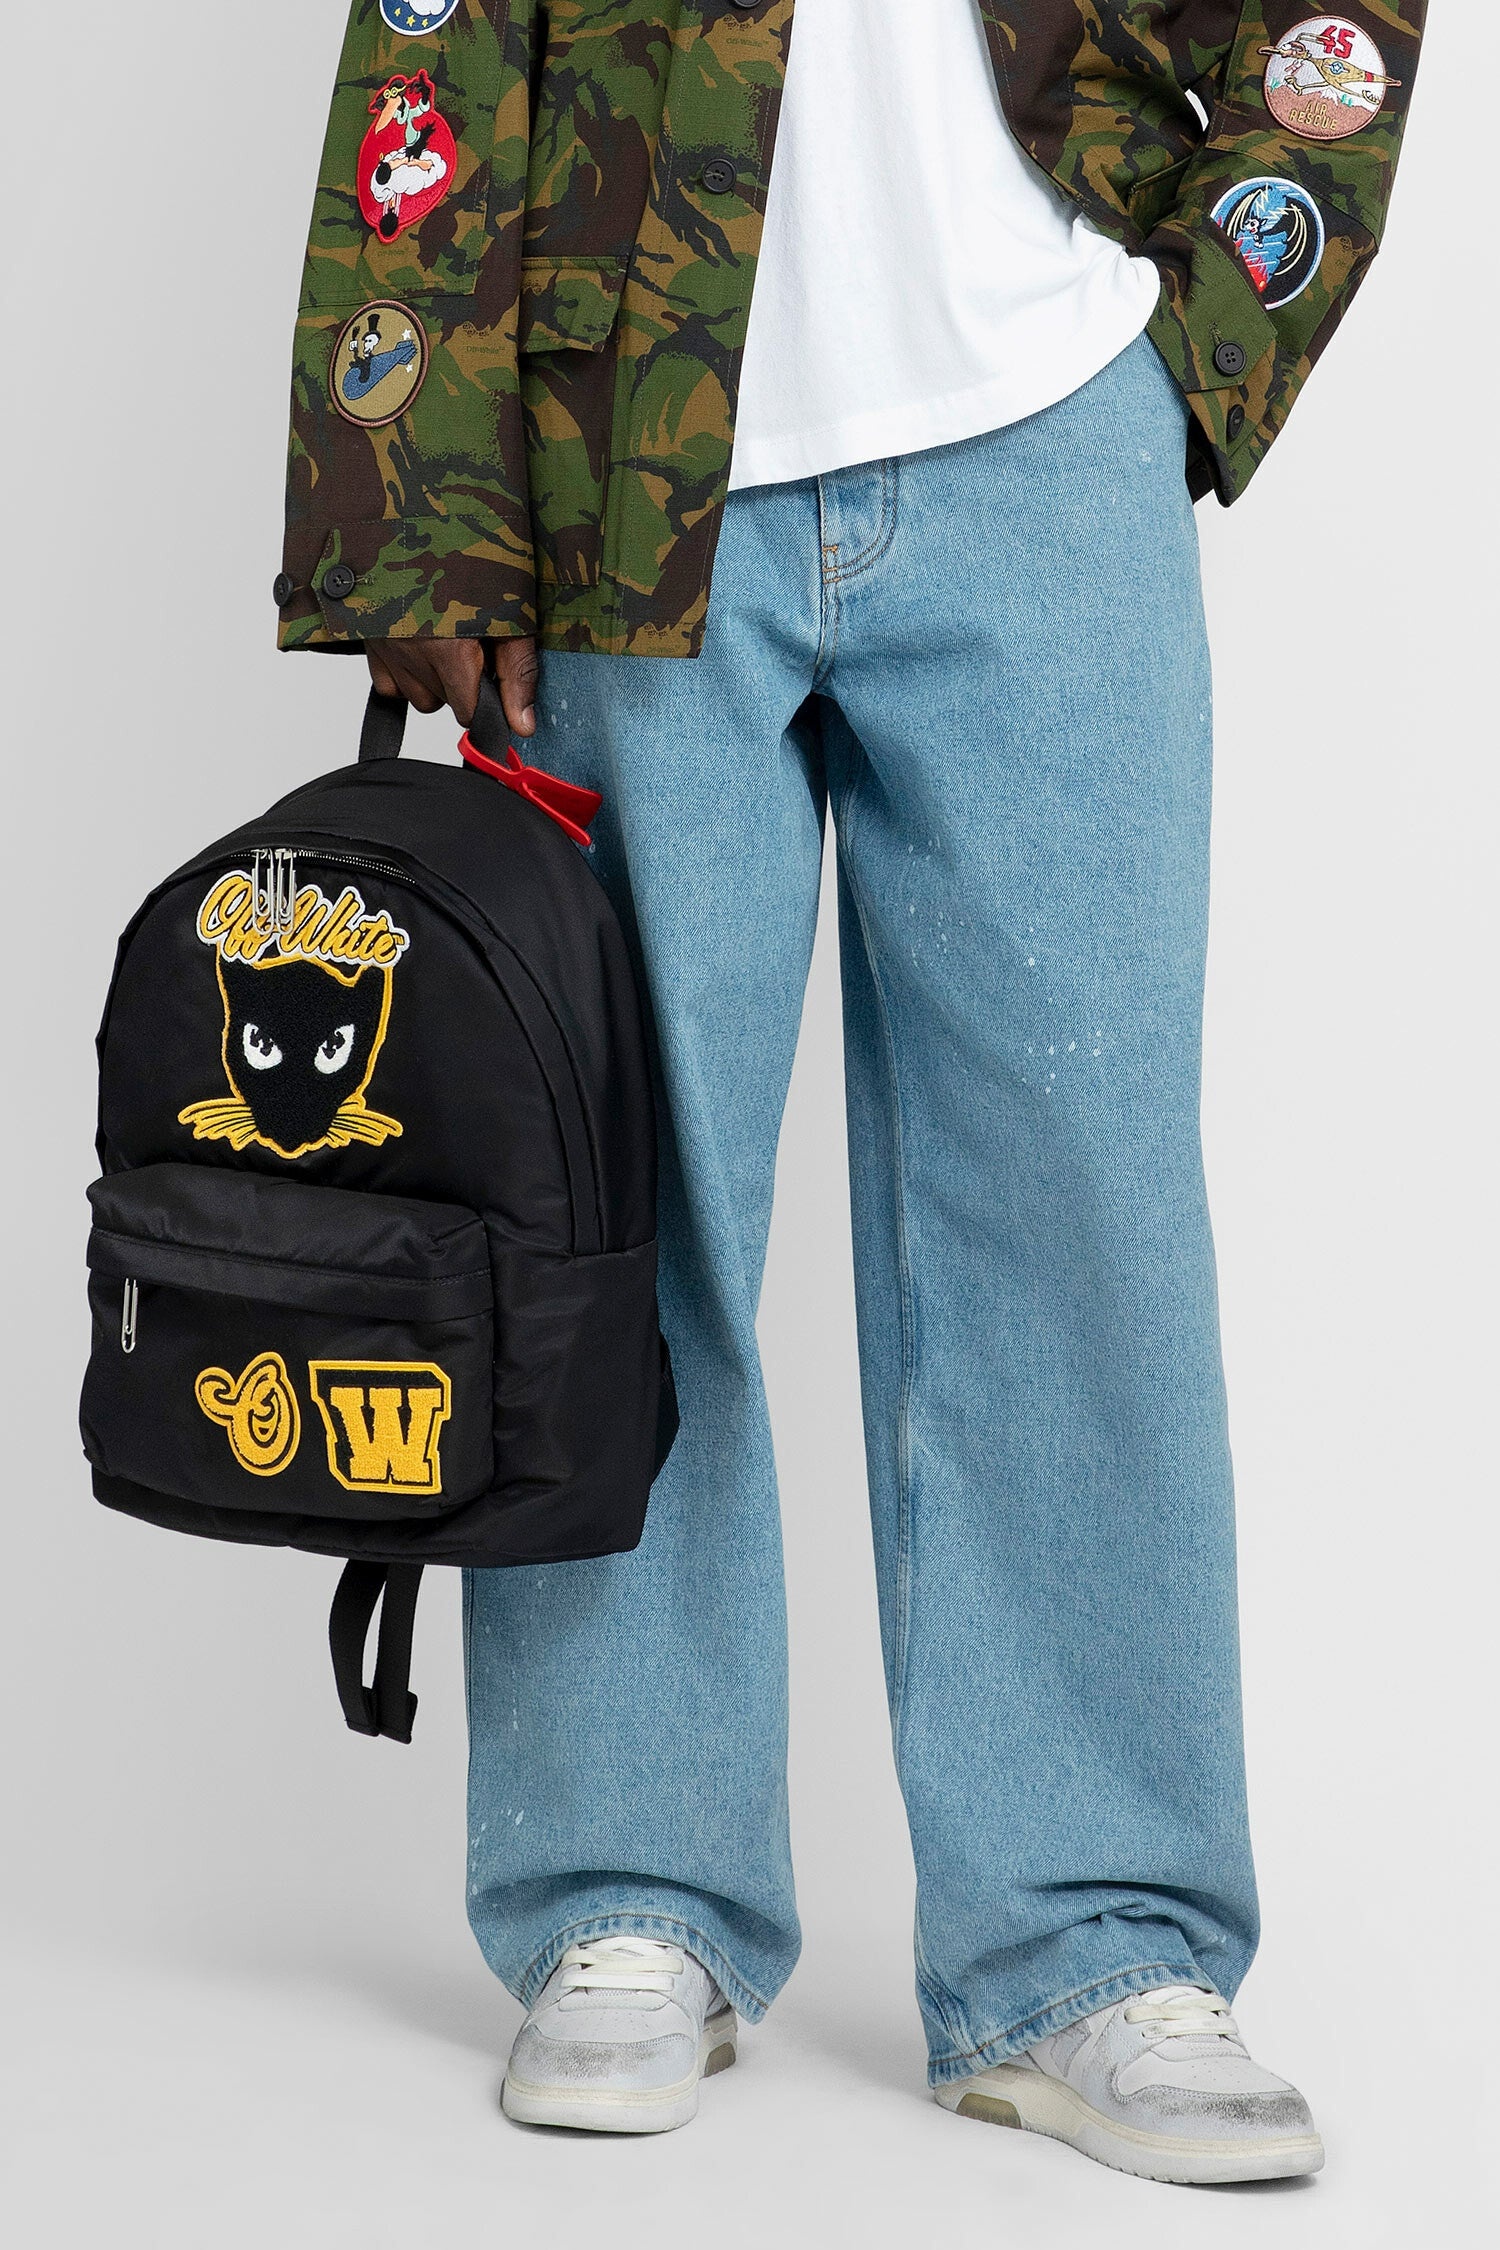 OFF-WHITE MAN BLUE JEANS - 1